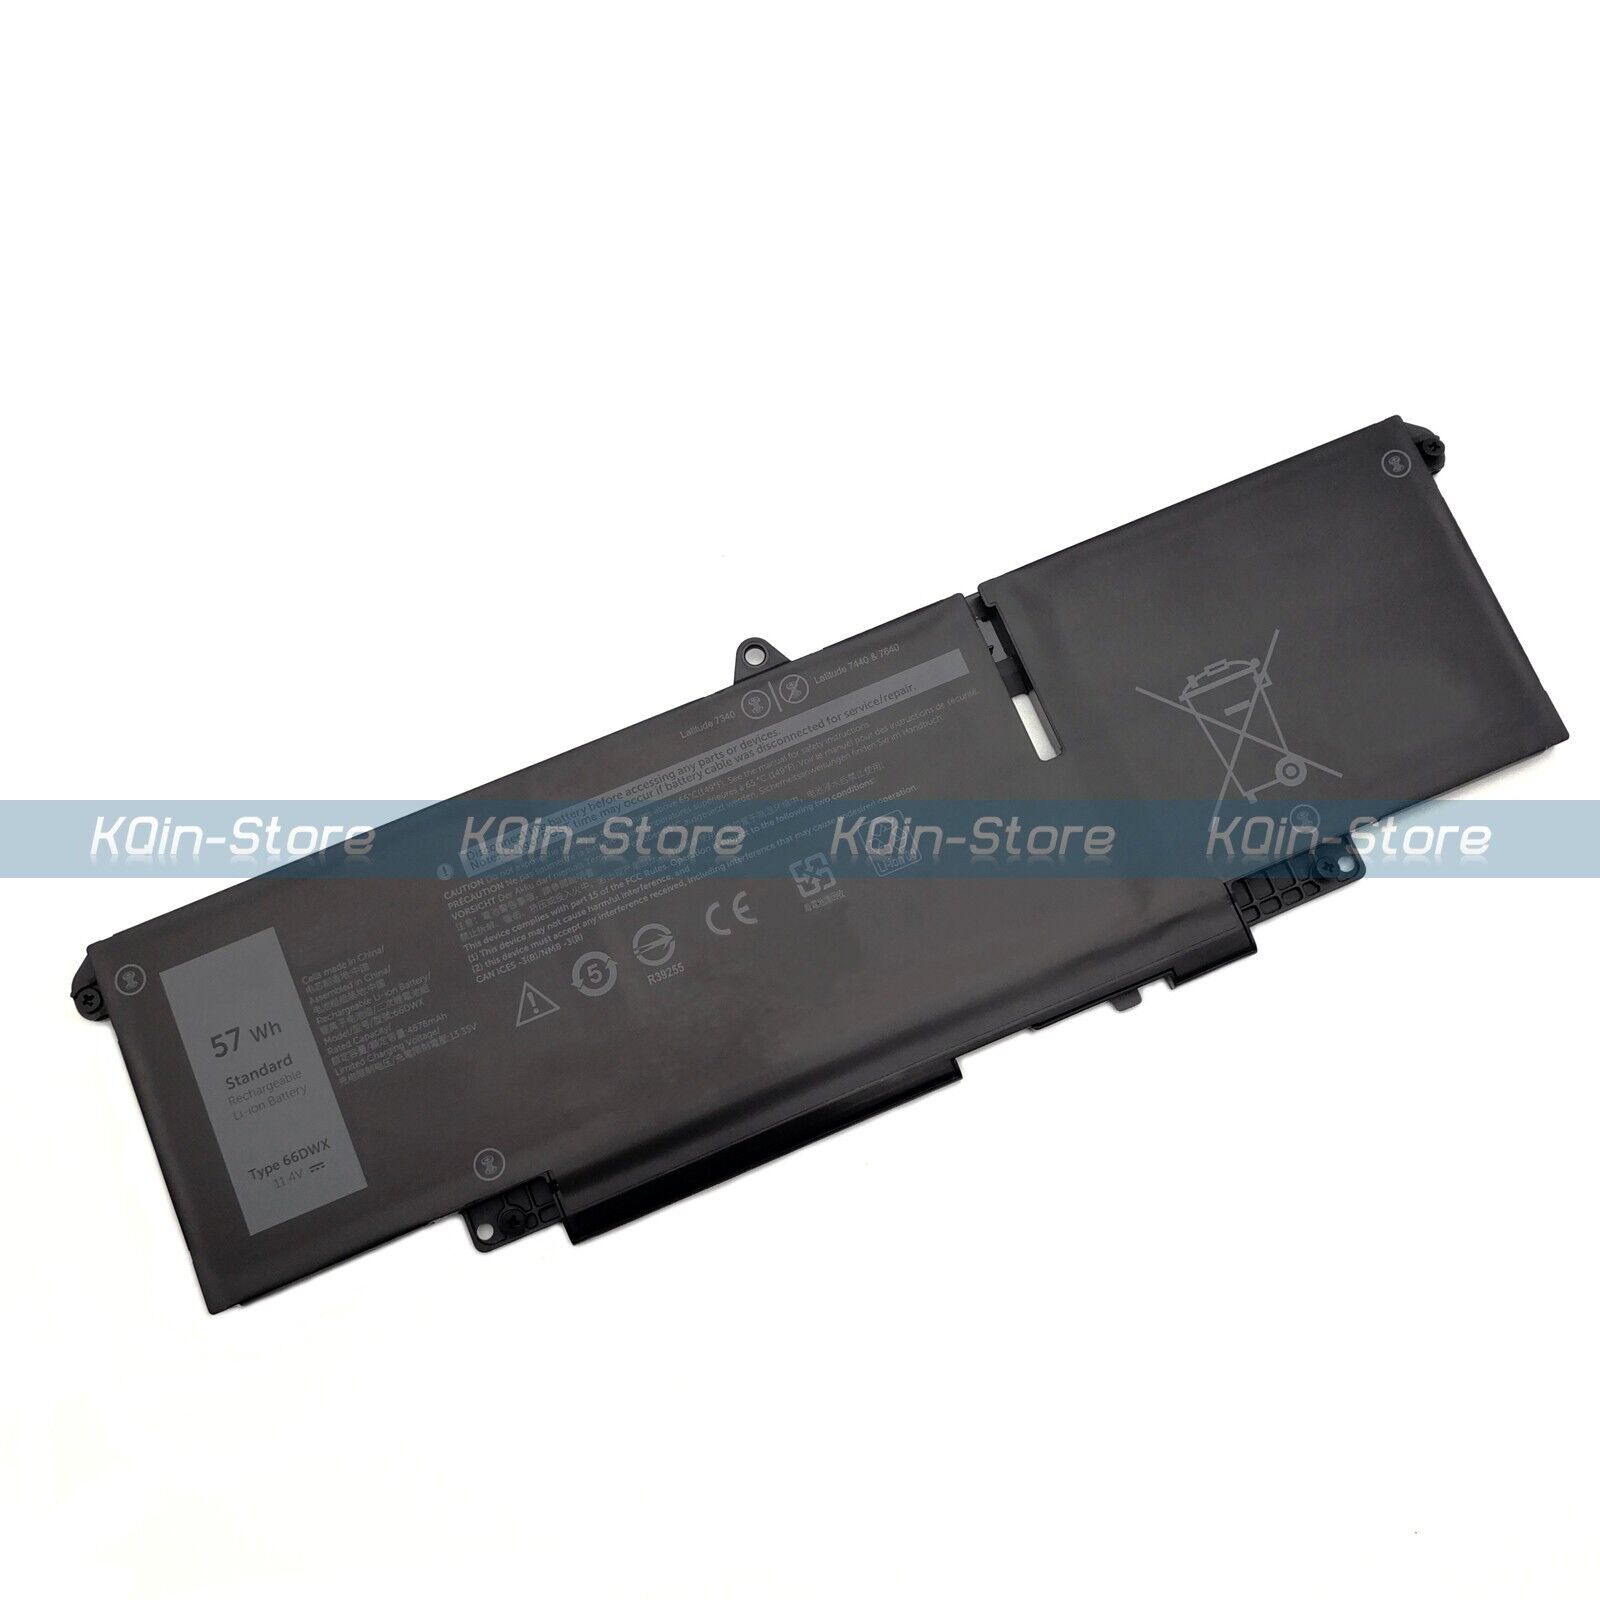 New 66DWX 57Wh 3Cell Laptop Battery for Dell Latitude 7340 7440 7640 WW8N8 047T0